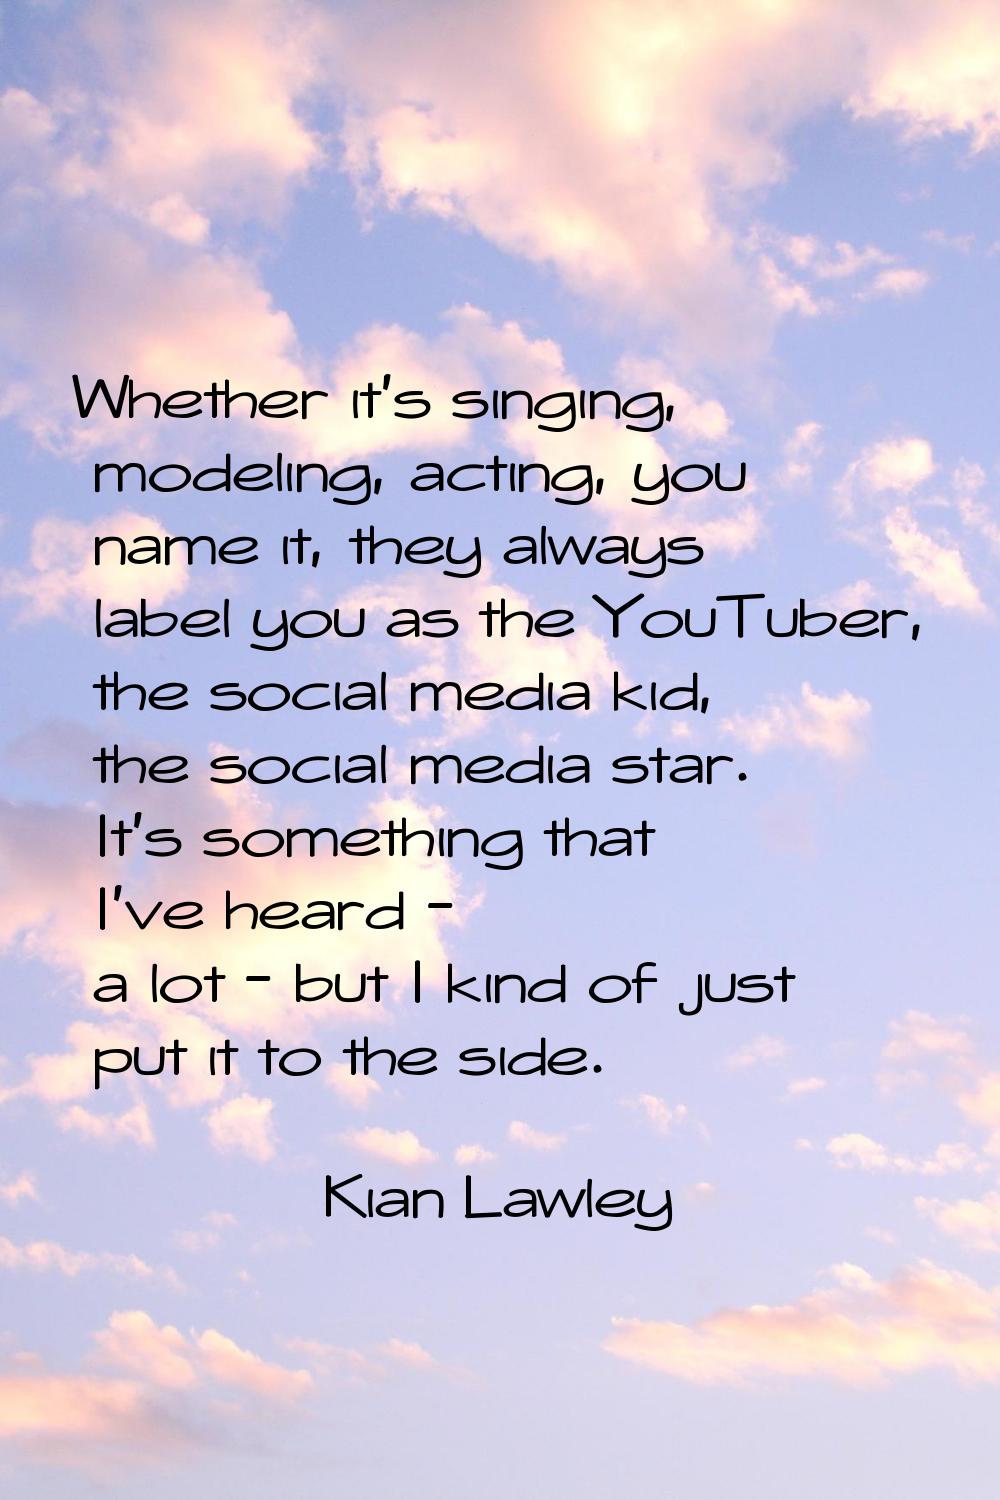 Whether it's singing, modeling, acting, you name it, they always label you as the YouTuber, the soc